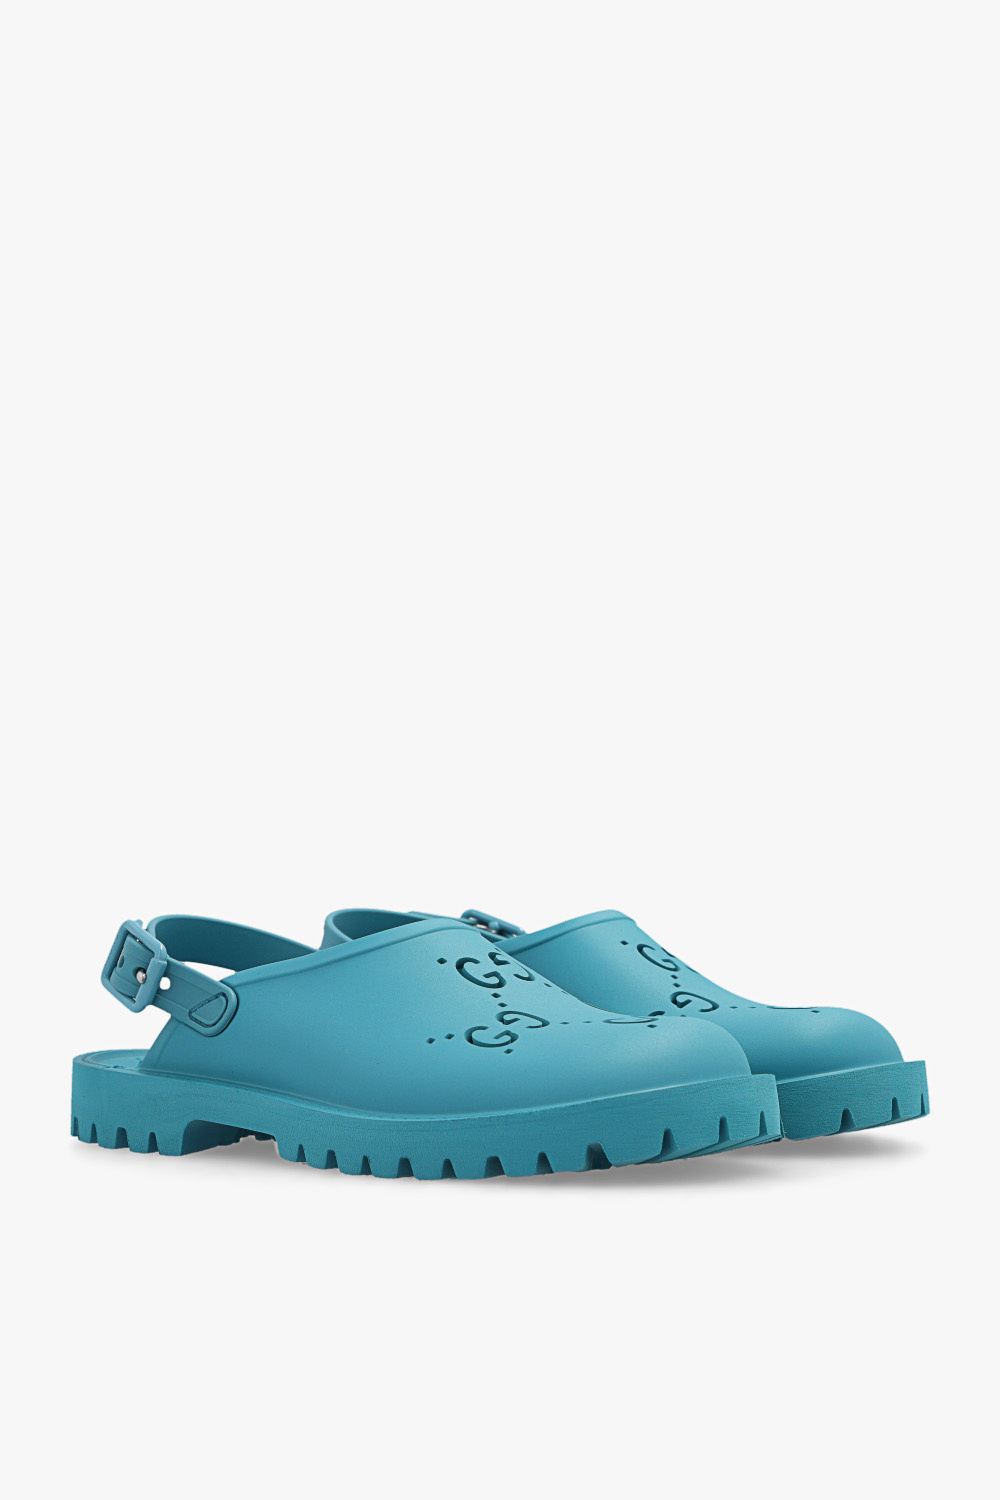 Gucci Kids shoes mrt580xs with monogram